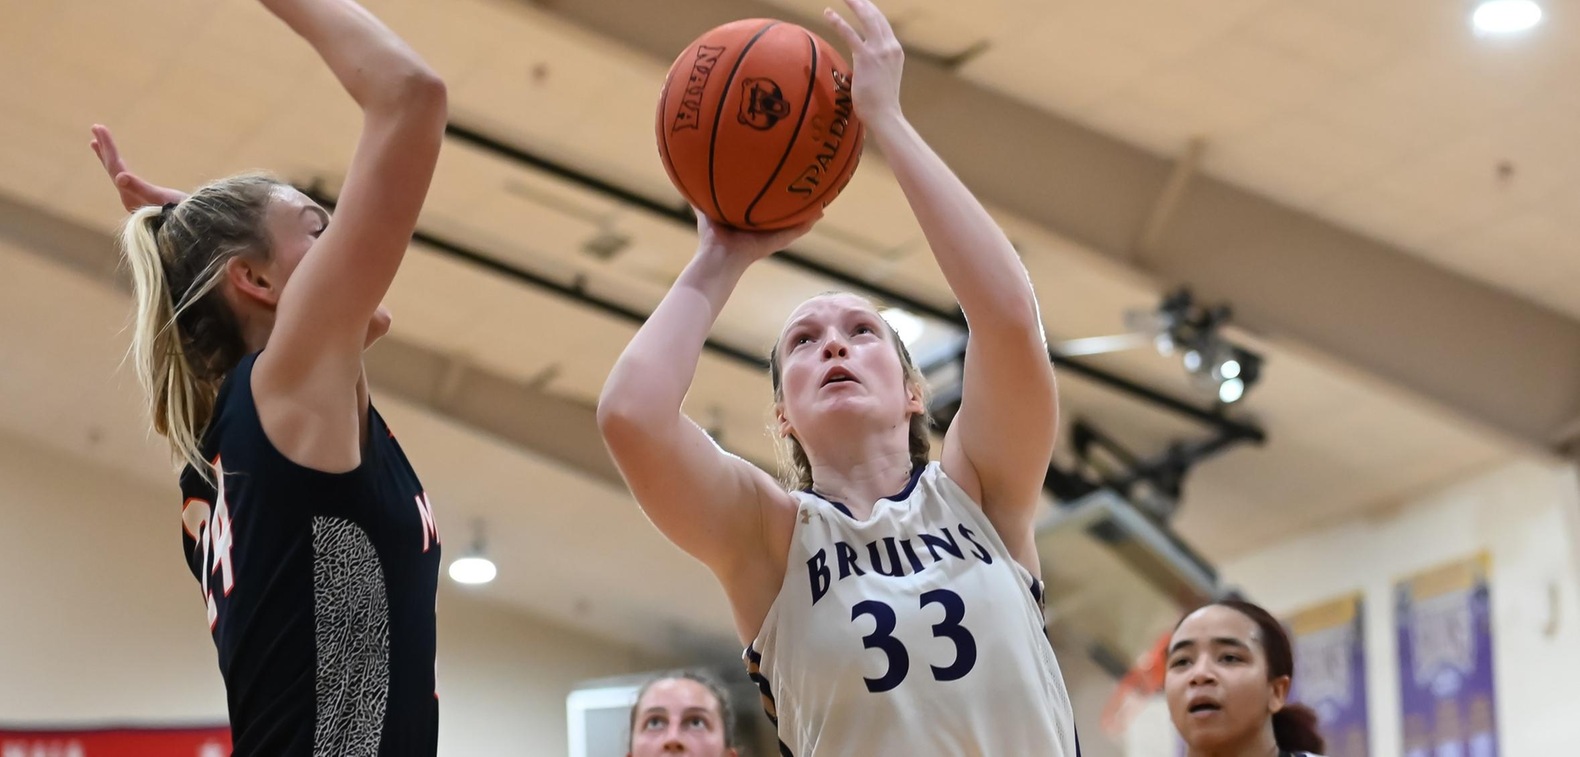 Second half run sees CUNE pull away from Bruins